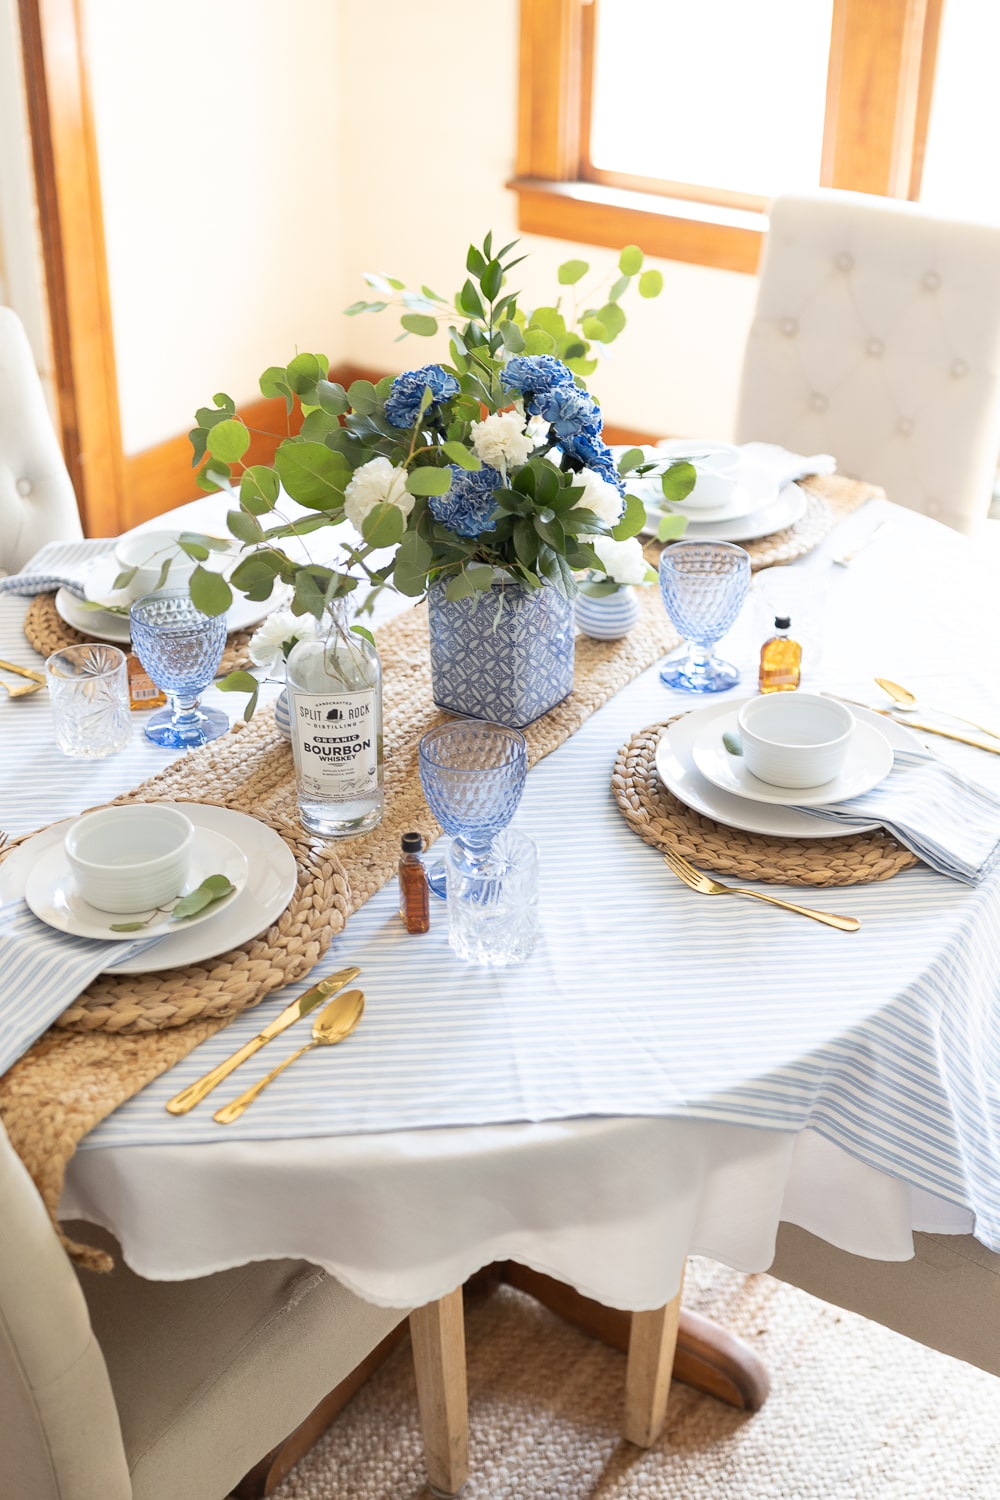 Blogger Stephanie Ziajka shares simple Father's Day table decor on Diary of a Debutante